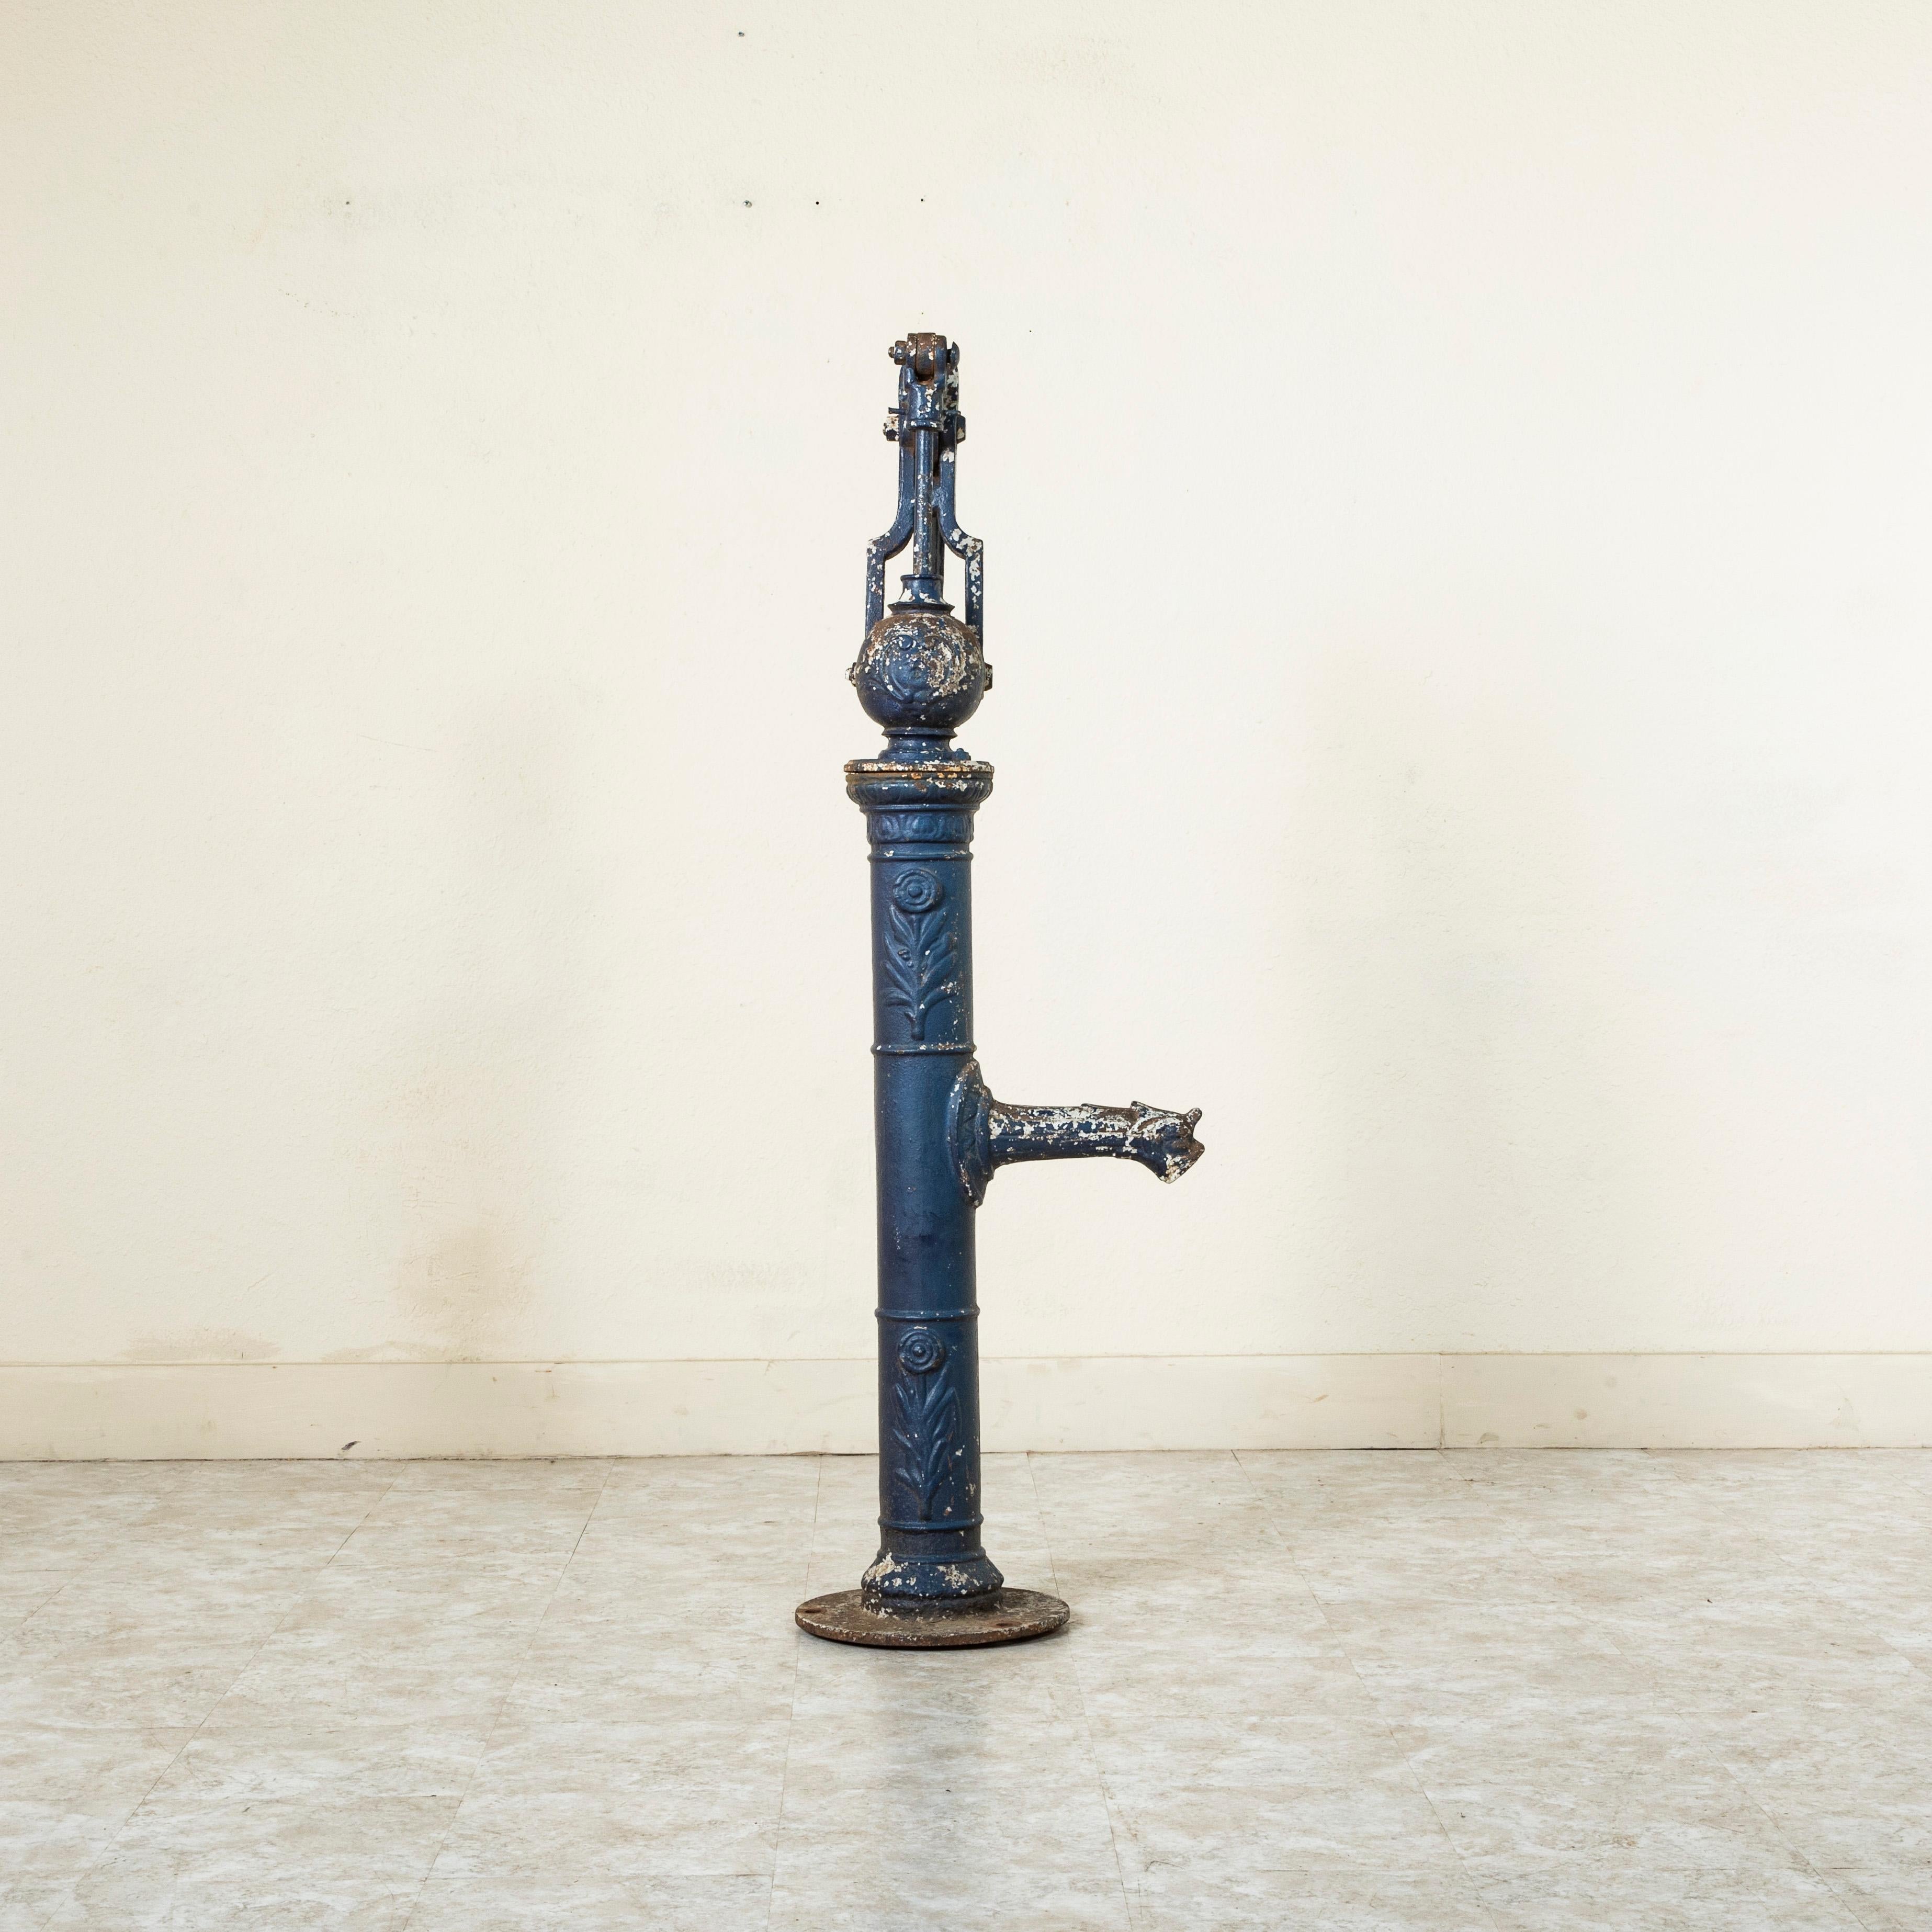 Mid-19th Century French Cast Iron Pump or Fountain from Normandy For Sale 2